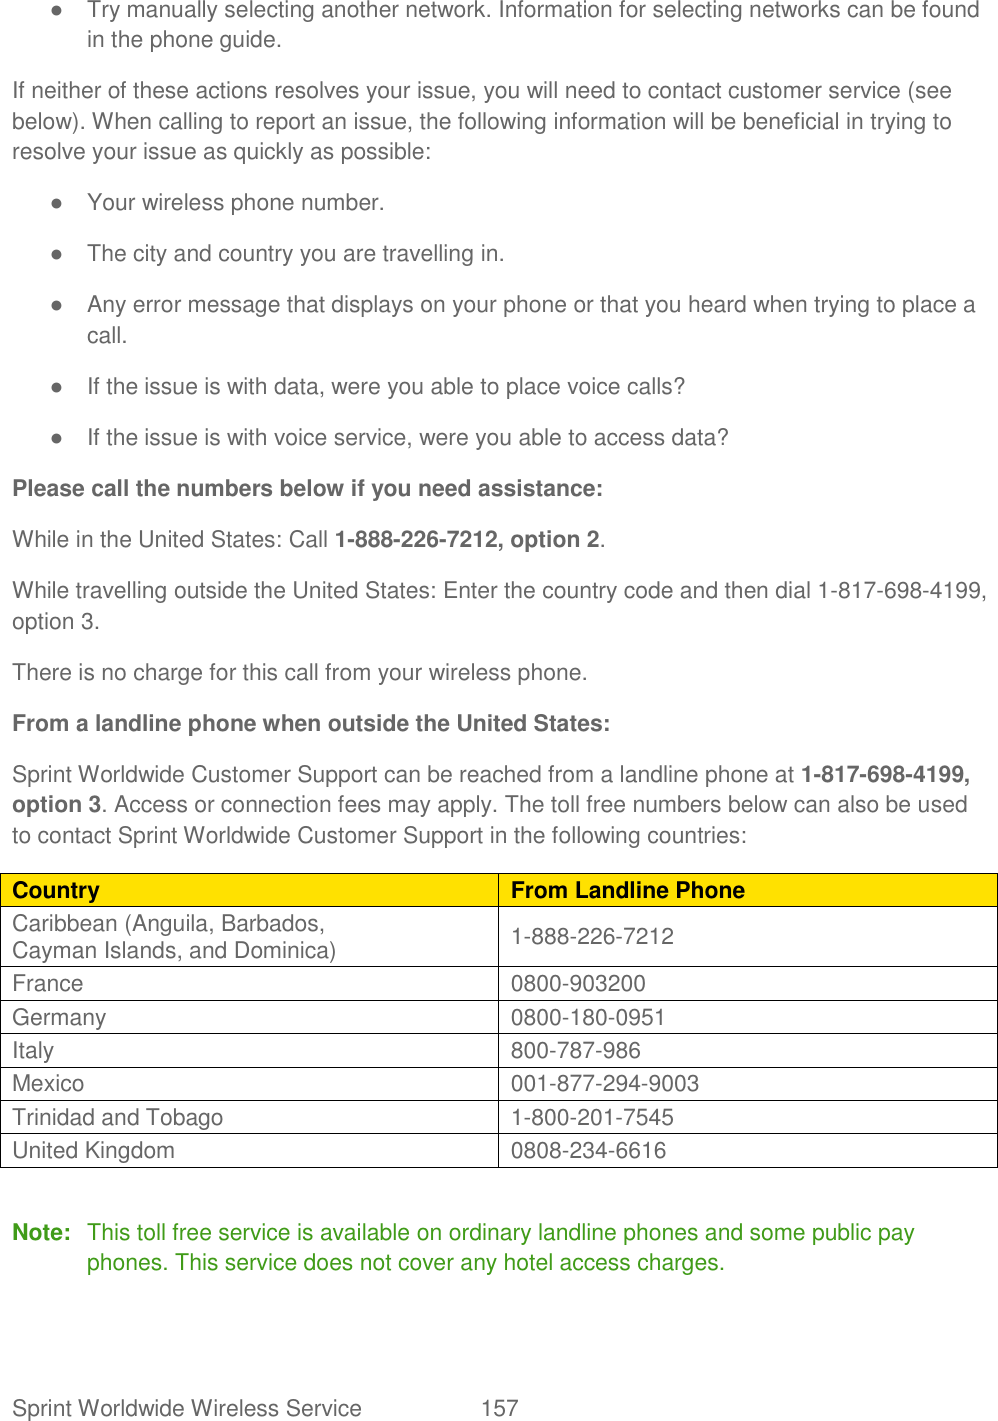 Sprint Worldwide Wireless Service  157   ●  Try manually selecting another network. Information for selecting networks can be found in the phone guide. If neither of these actions resolves your issue, you will need to contact customer service (see below). When calling to report an issue, the following information will be beneficial in trying to resolve your issue as quickly as possible:  ●  Your wireless phone number. ●  The city and country you are travelling in. ●  Any error message that displays on your phone or that you heard when trying to place a call.  ●  If the issue is with data, were you able to place voice calls? ●  If the issue is with voice service, were you able to access data? Please call the numbers below if you need assistance:  While in the United States: Call 1-888-226-7212, option 2. While travelling outside the United States: Enter the country code and then dial 1-817-698-4199, option 3. There is no charge for this call from your wireless phone. From a landline phone when outside the United States: Sprint Worldwide Customer Support can be reached from a landline phone at 1-817-698-4199, option 3. Access or connection fees may apply. The toll free numbers below can also be used to contact Sprint Worldwide Customer Support in the following countries: Country From Landline Phone Caribbean (Anguila, Barbados,  Cayman Islands, and Dominica)  1-888-226-7212  France  0800-903200  Germany  0800-180-0951  Italy  800-787-986  Mexico  001-877-294-9003  Trinidad and Tobago  1-800-201-7545  United Kingdom  0808-234-6616   Note:  This toll free service is available on ordinary landline phones and some public pay phones. This service does not cover any hotel access charges. 